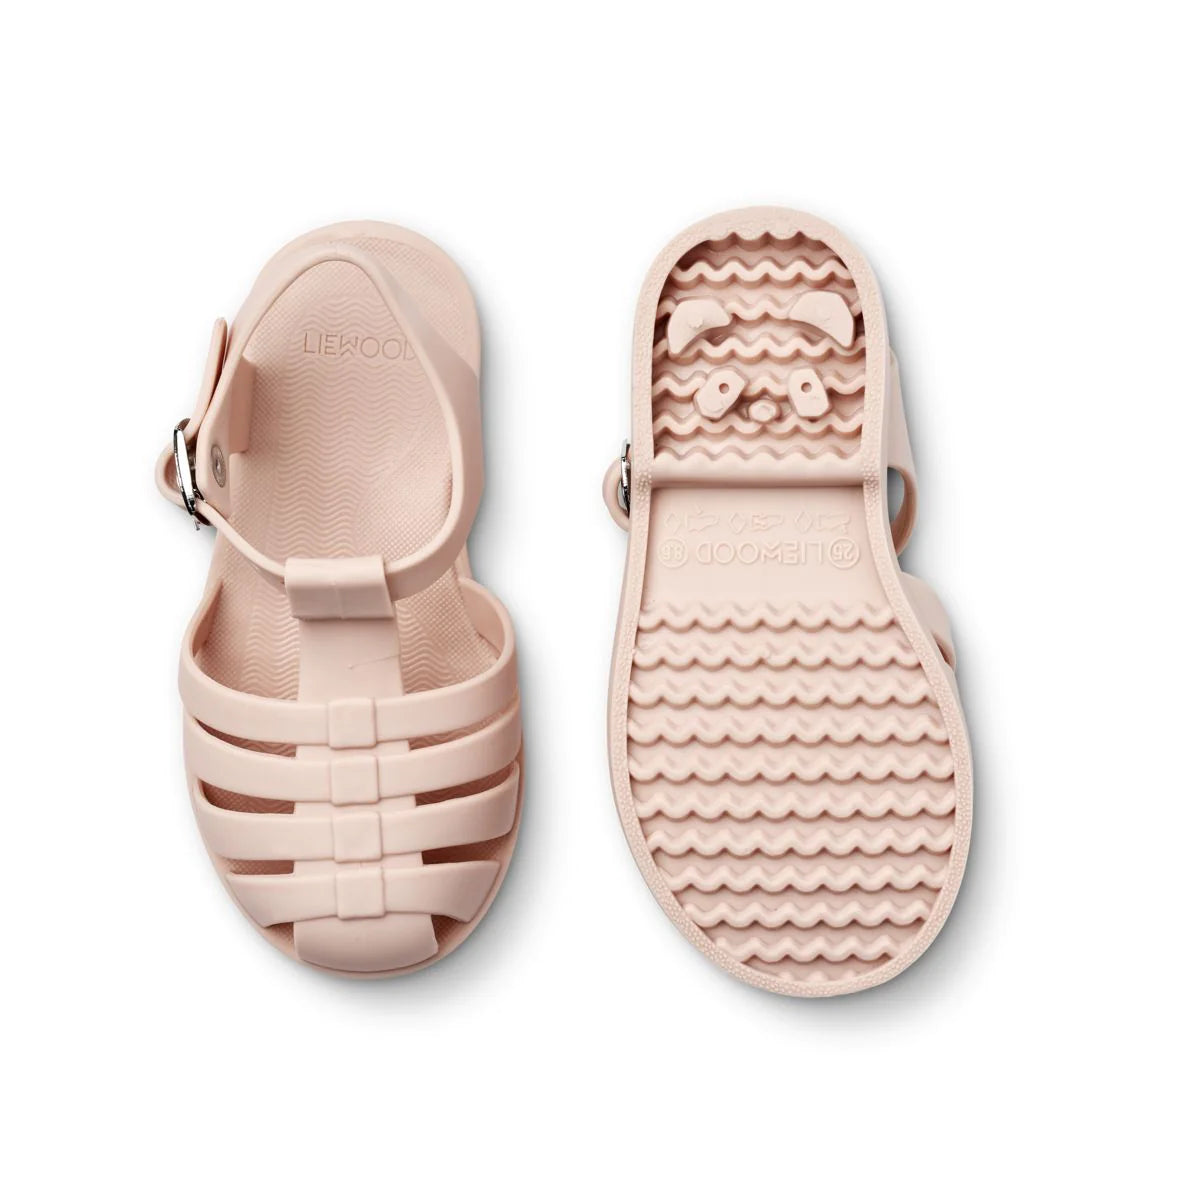 Load image into Gallery viewer, Bre Beach Sandals in Sorbet Rose
